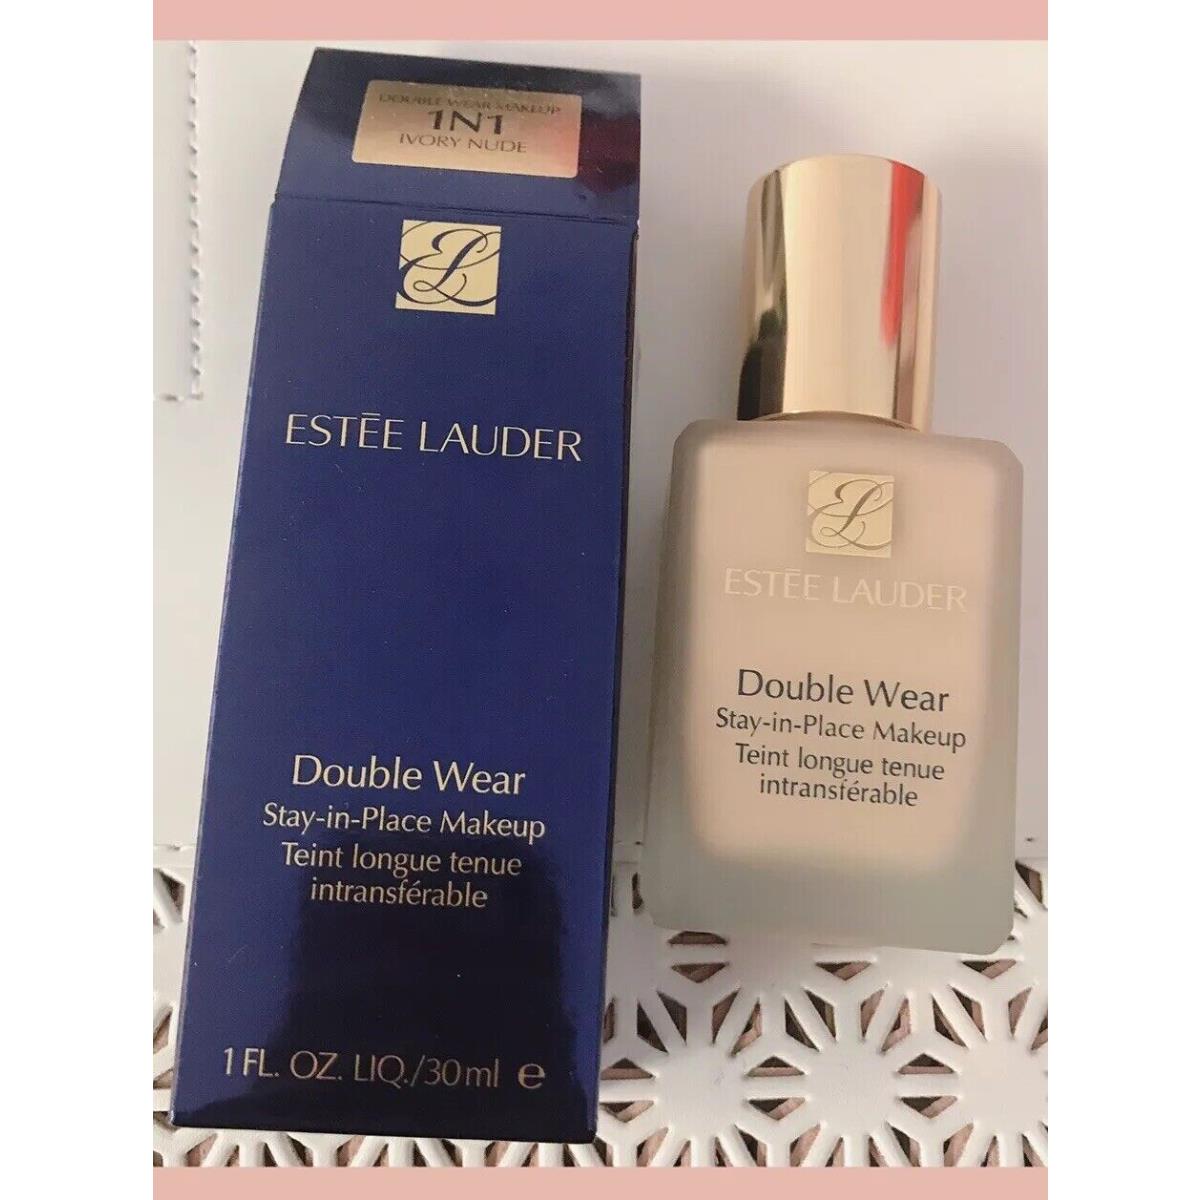 Estee Lauder Double Wear Stay-in-place Makeup Shade: 1N1 Ivory Full Size